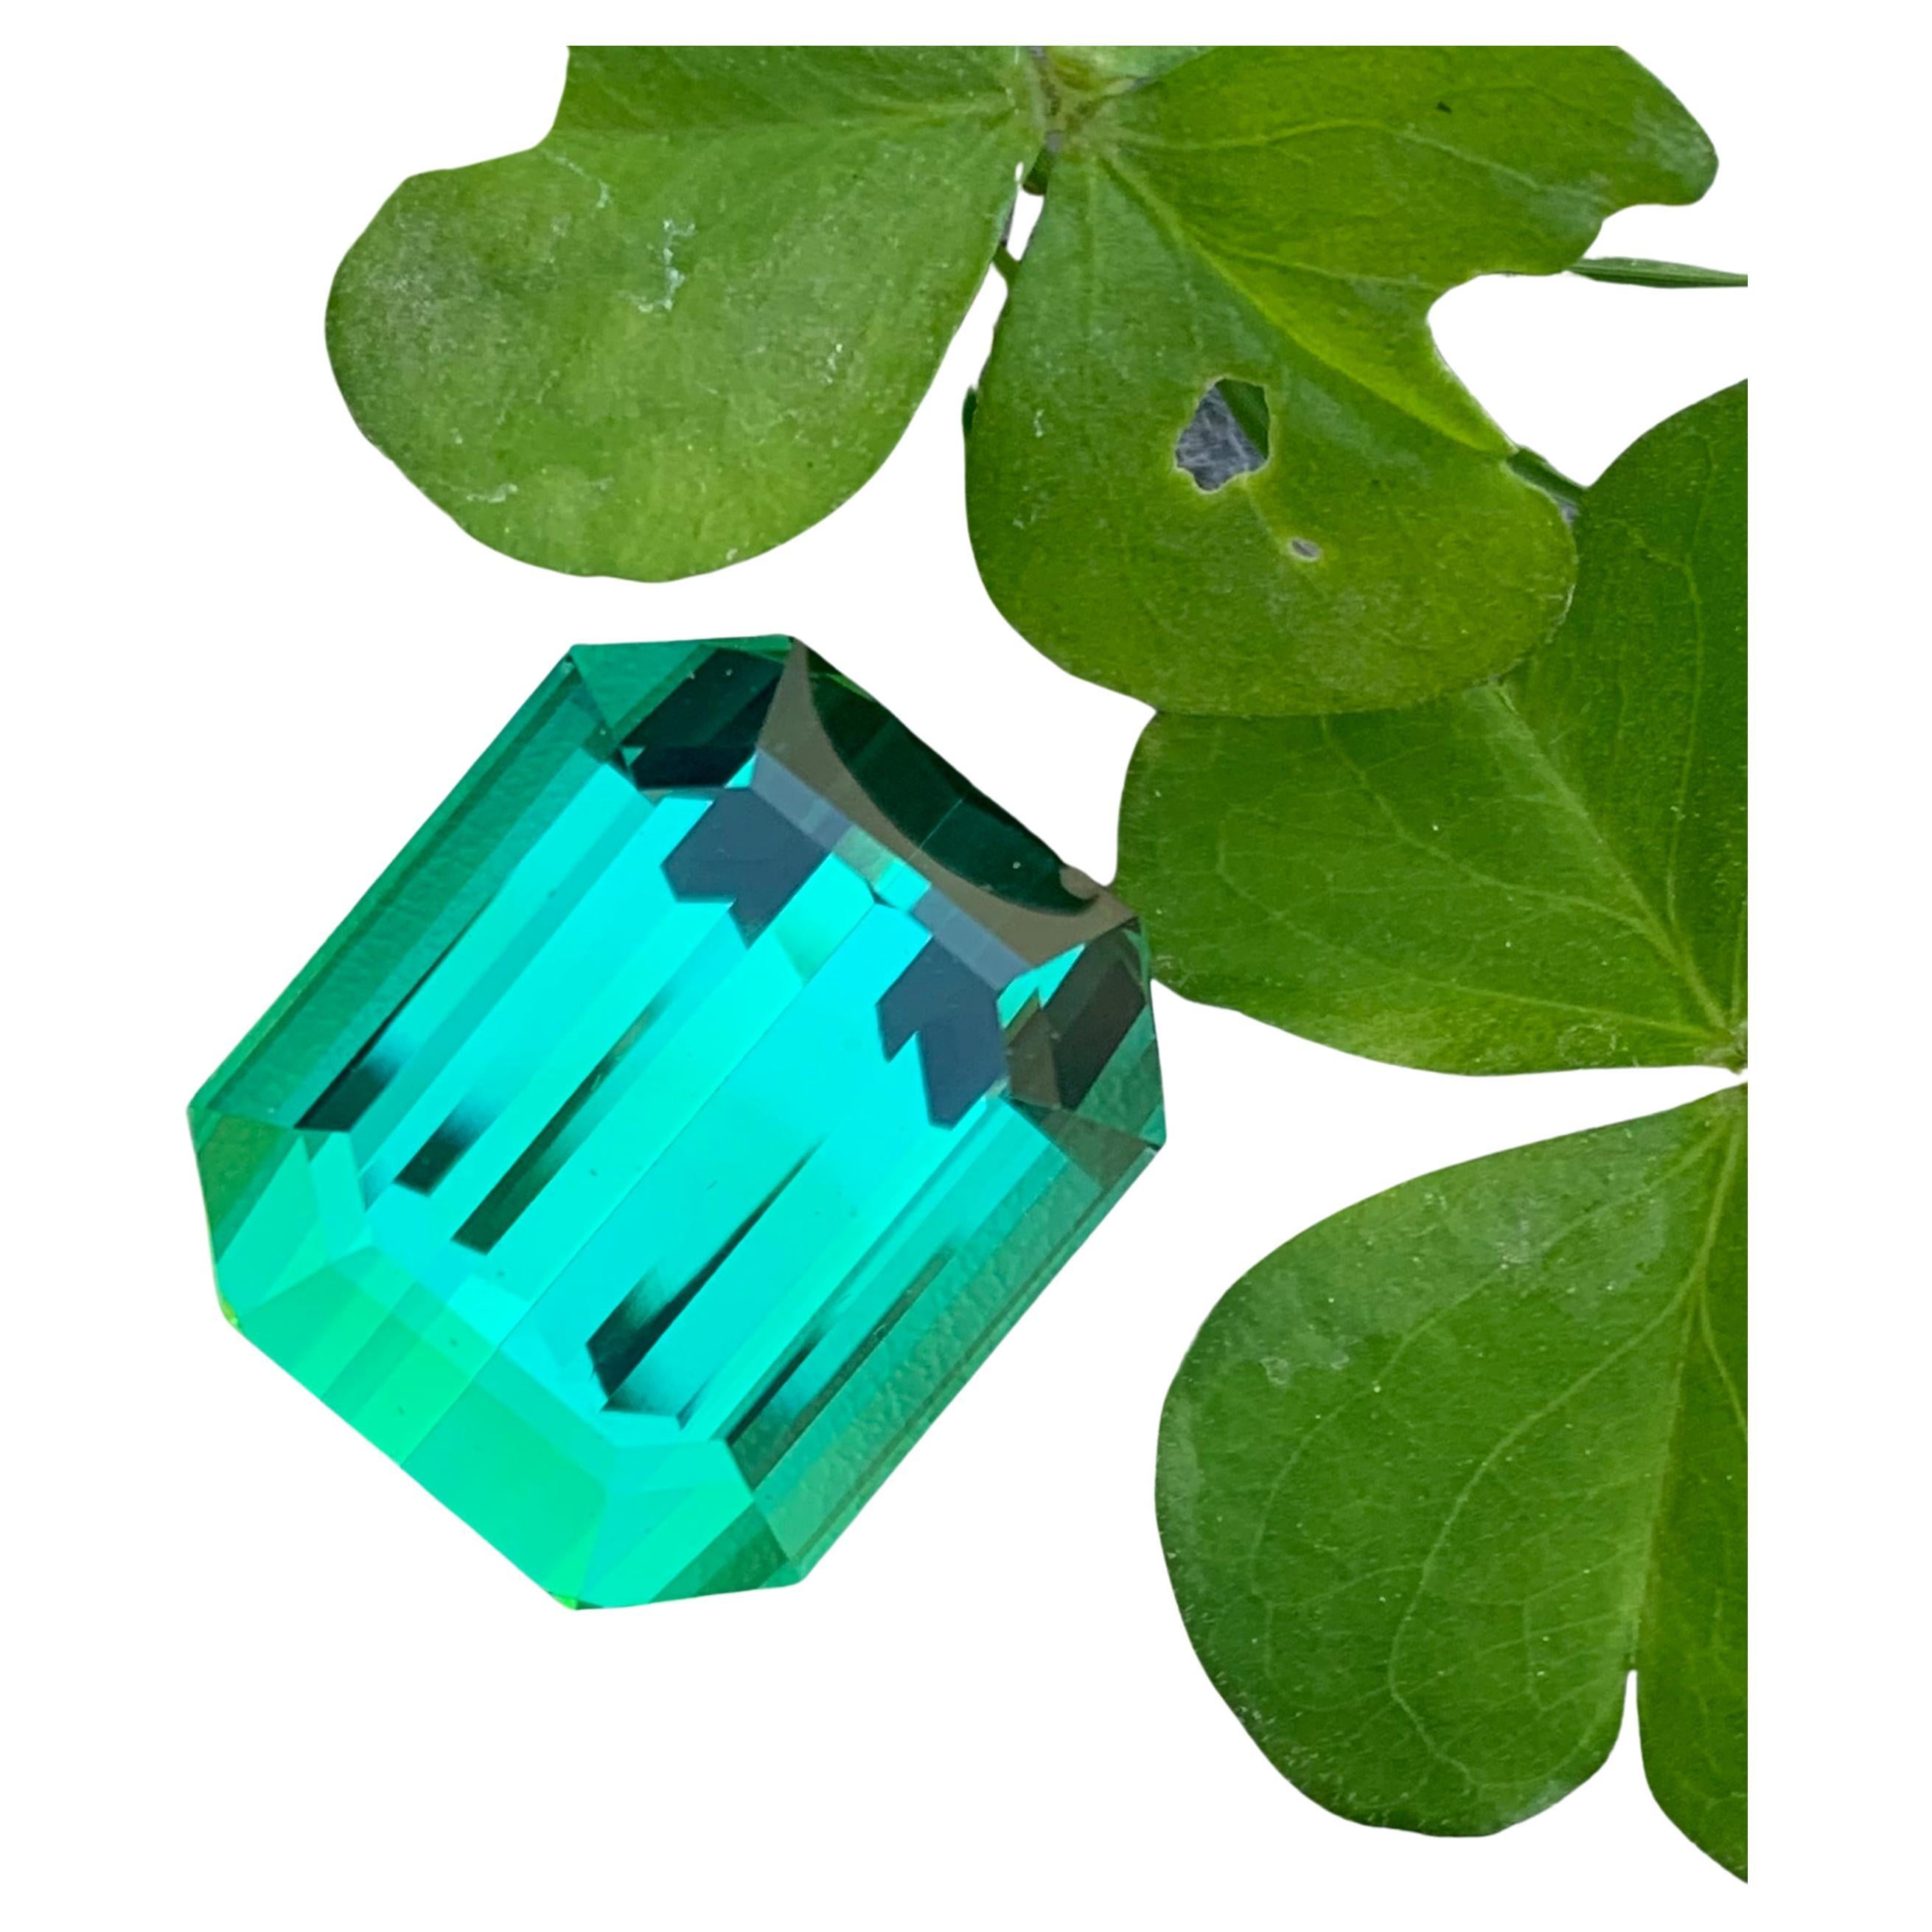 30.0 Carat Beautiful Quality Natural Lagoonish Green Tourmaline from Afghanistan For Sale